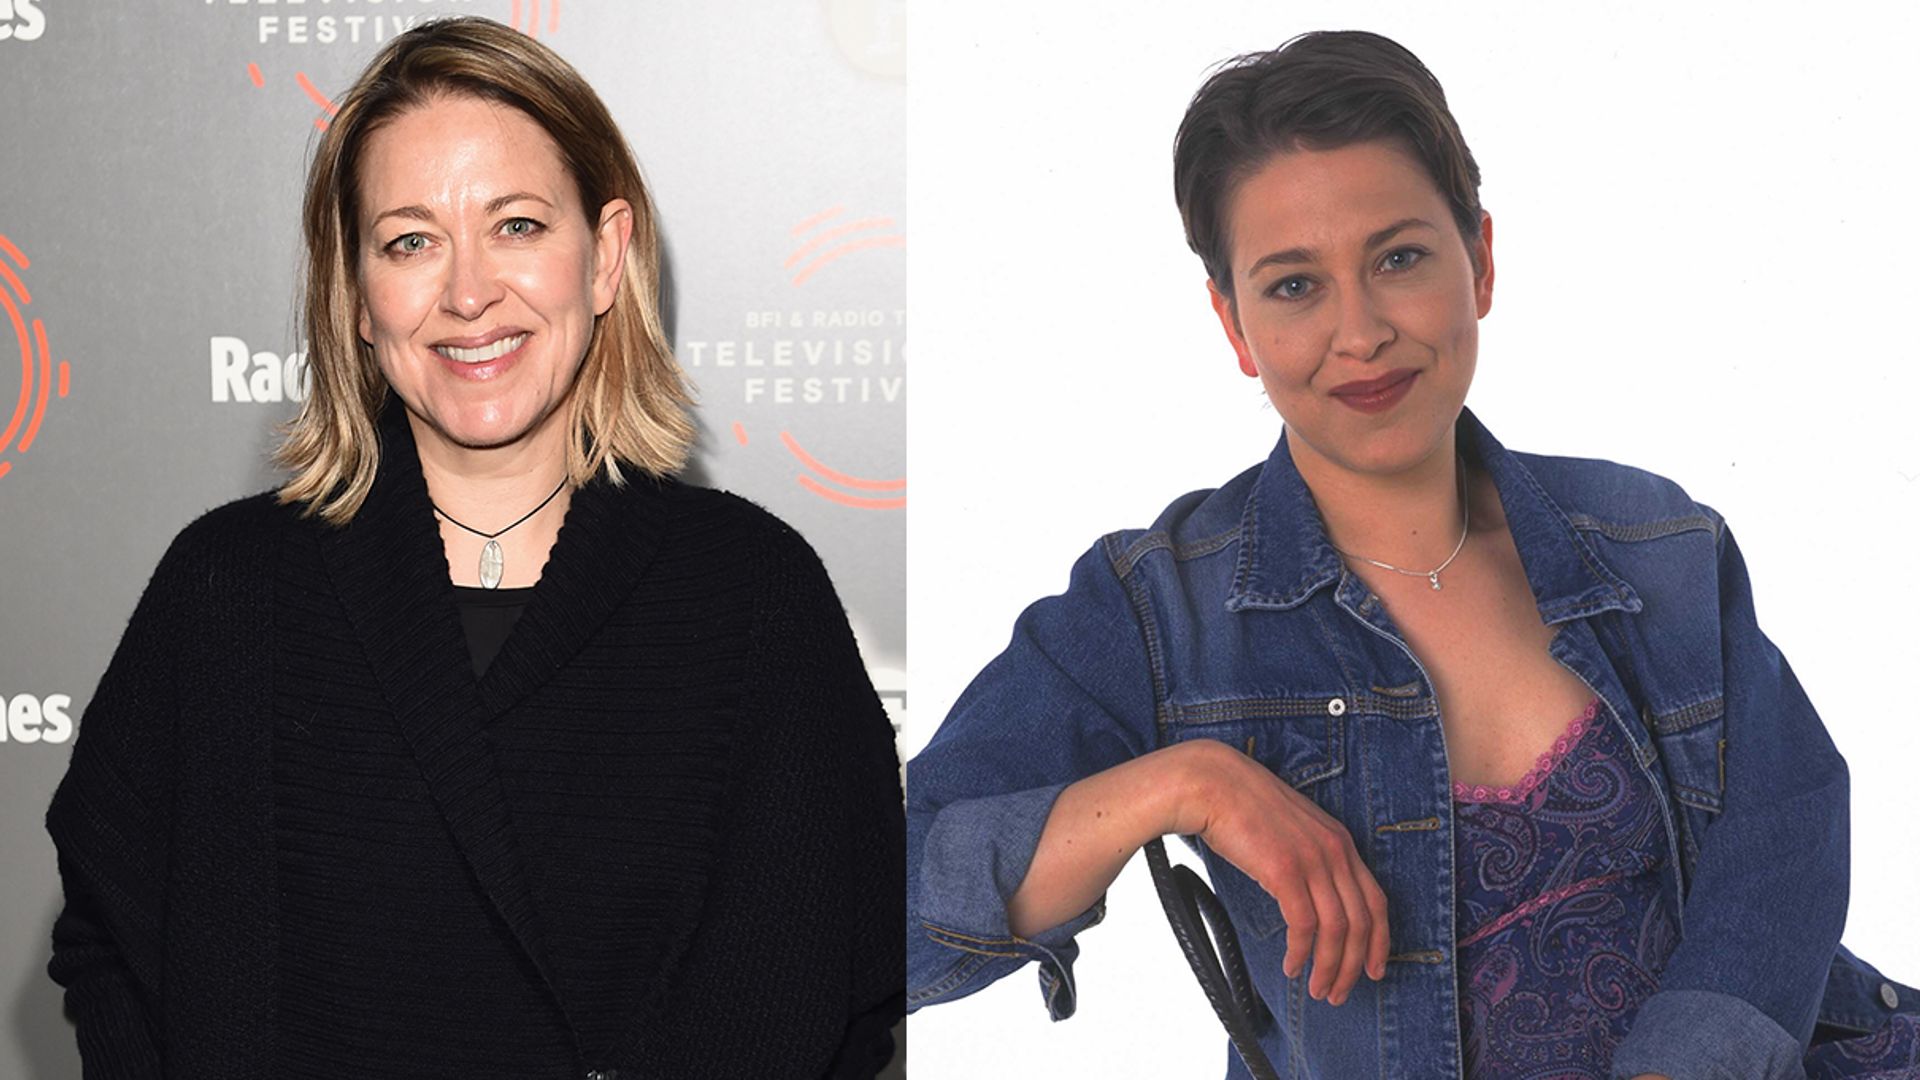 Take a look back at Nicola Walker's first major role in huge movie